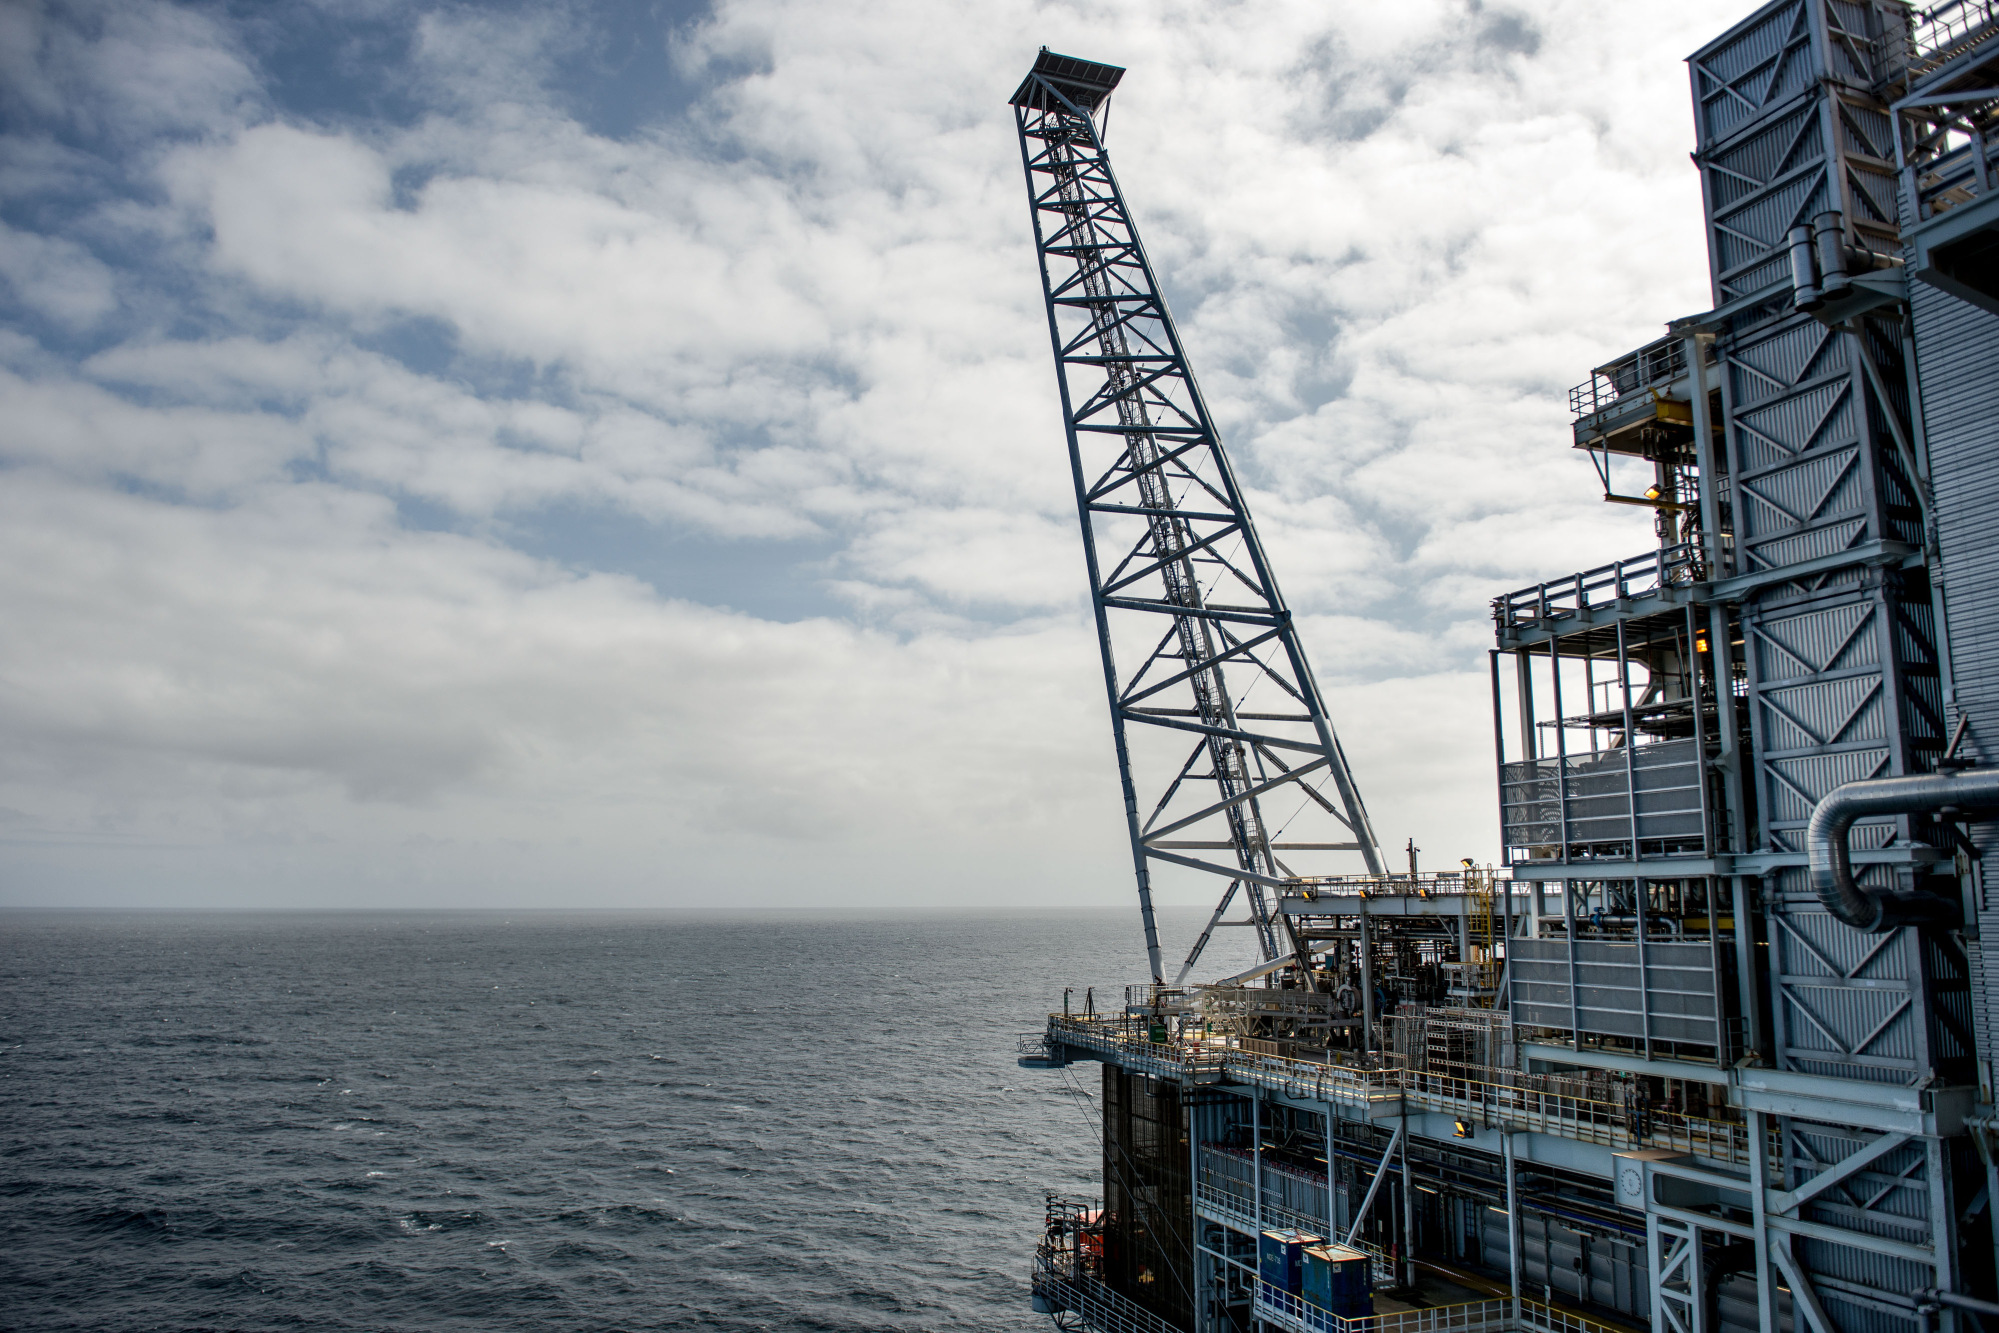 A natural gas platform&nbsp;stands in the North Sea, Norway.